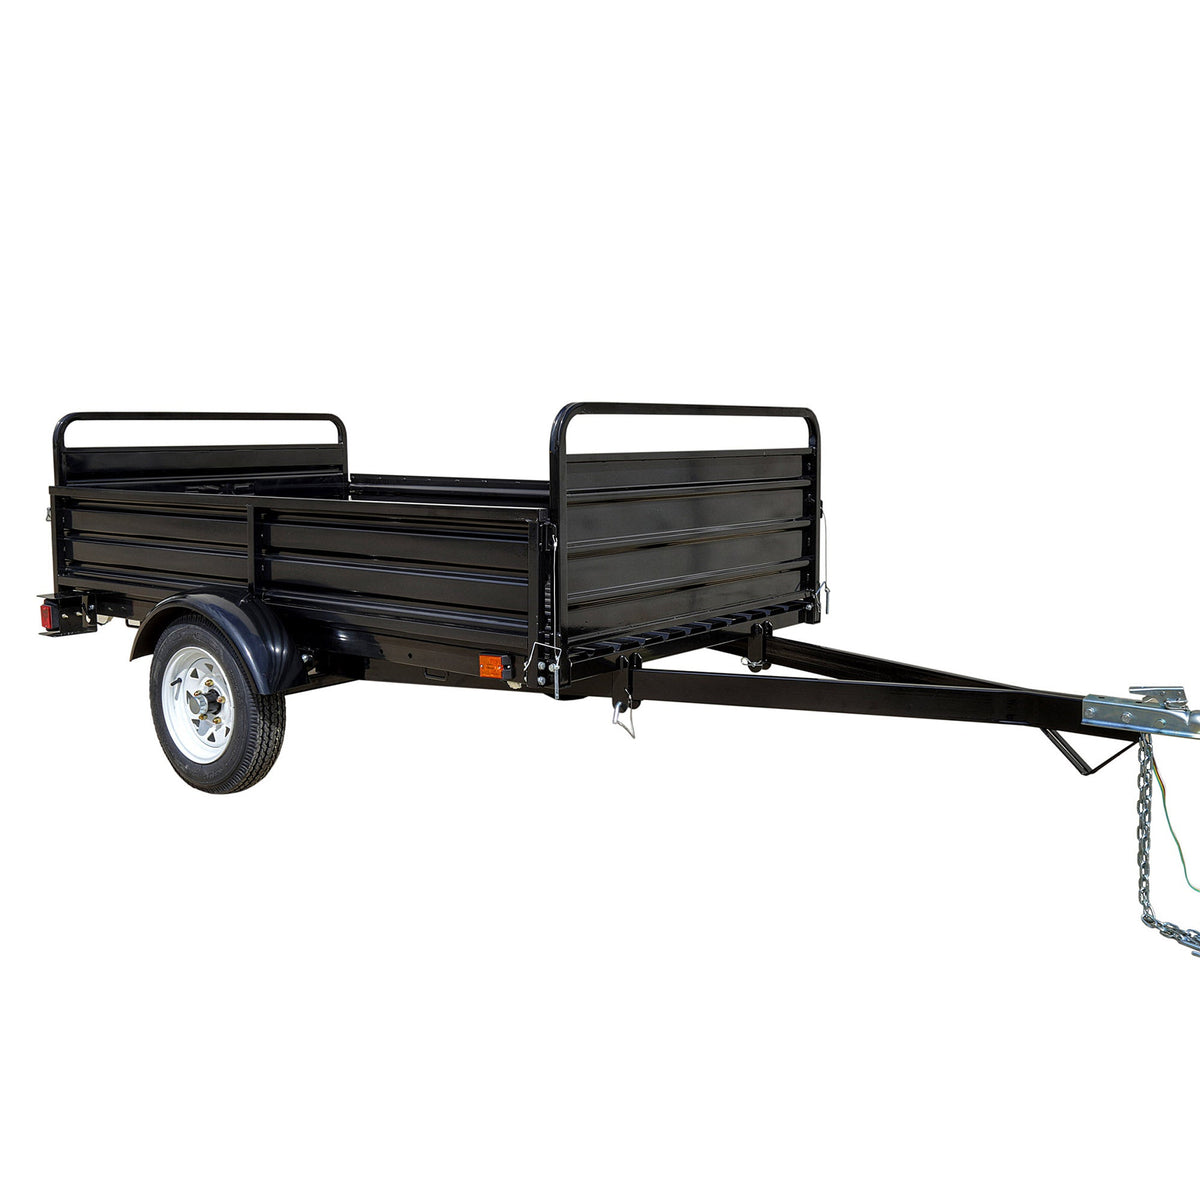 DK2 4.5 ft. x 7.5 ft. Mighty Multi Utility Trailer with Bed Tilt Image